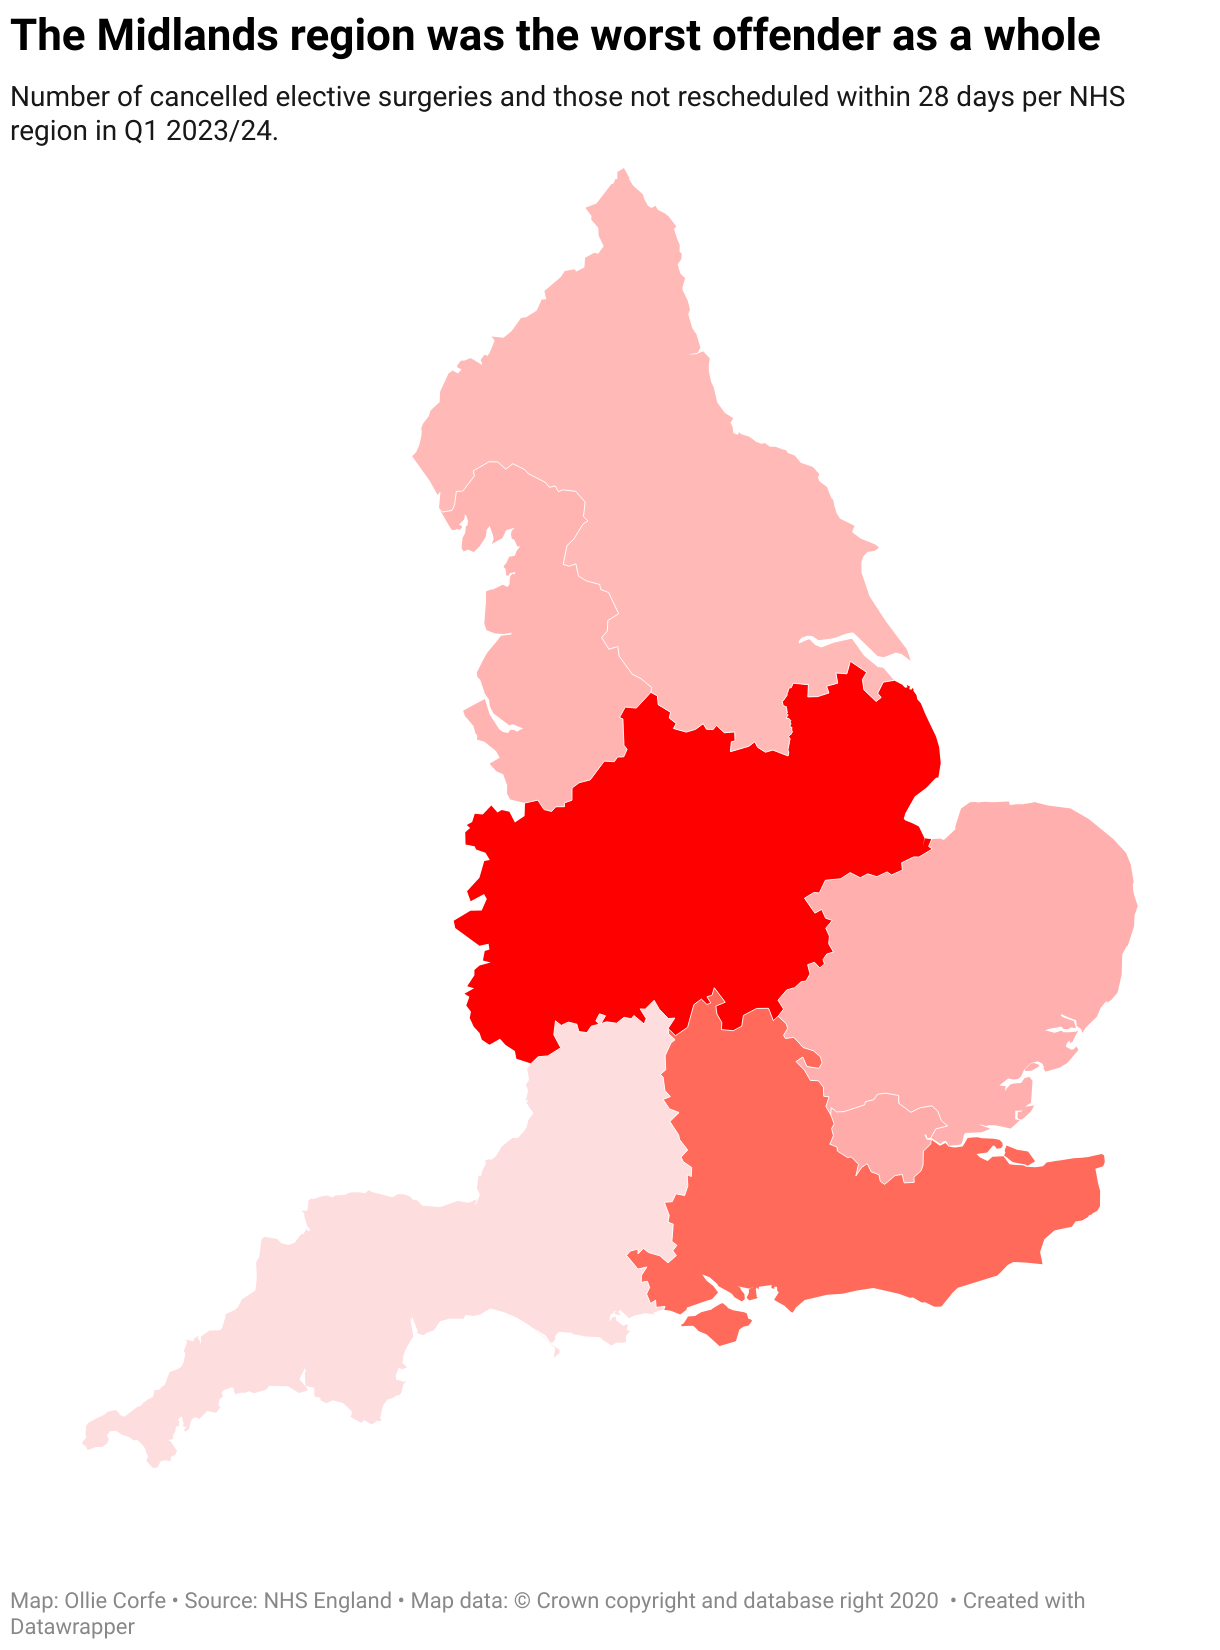 Map of NHS surgery cancellations.